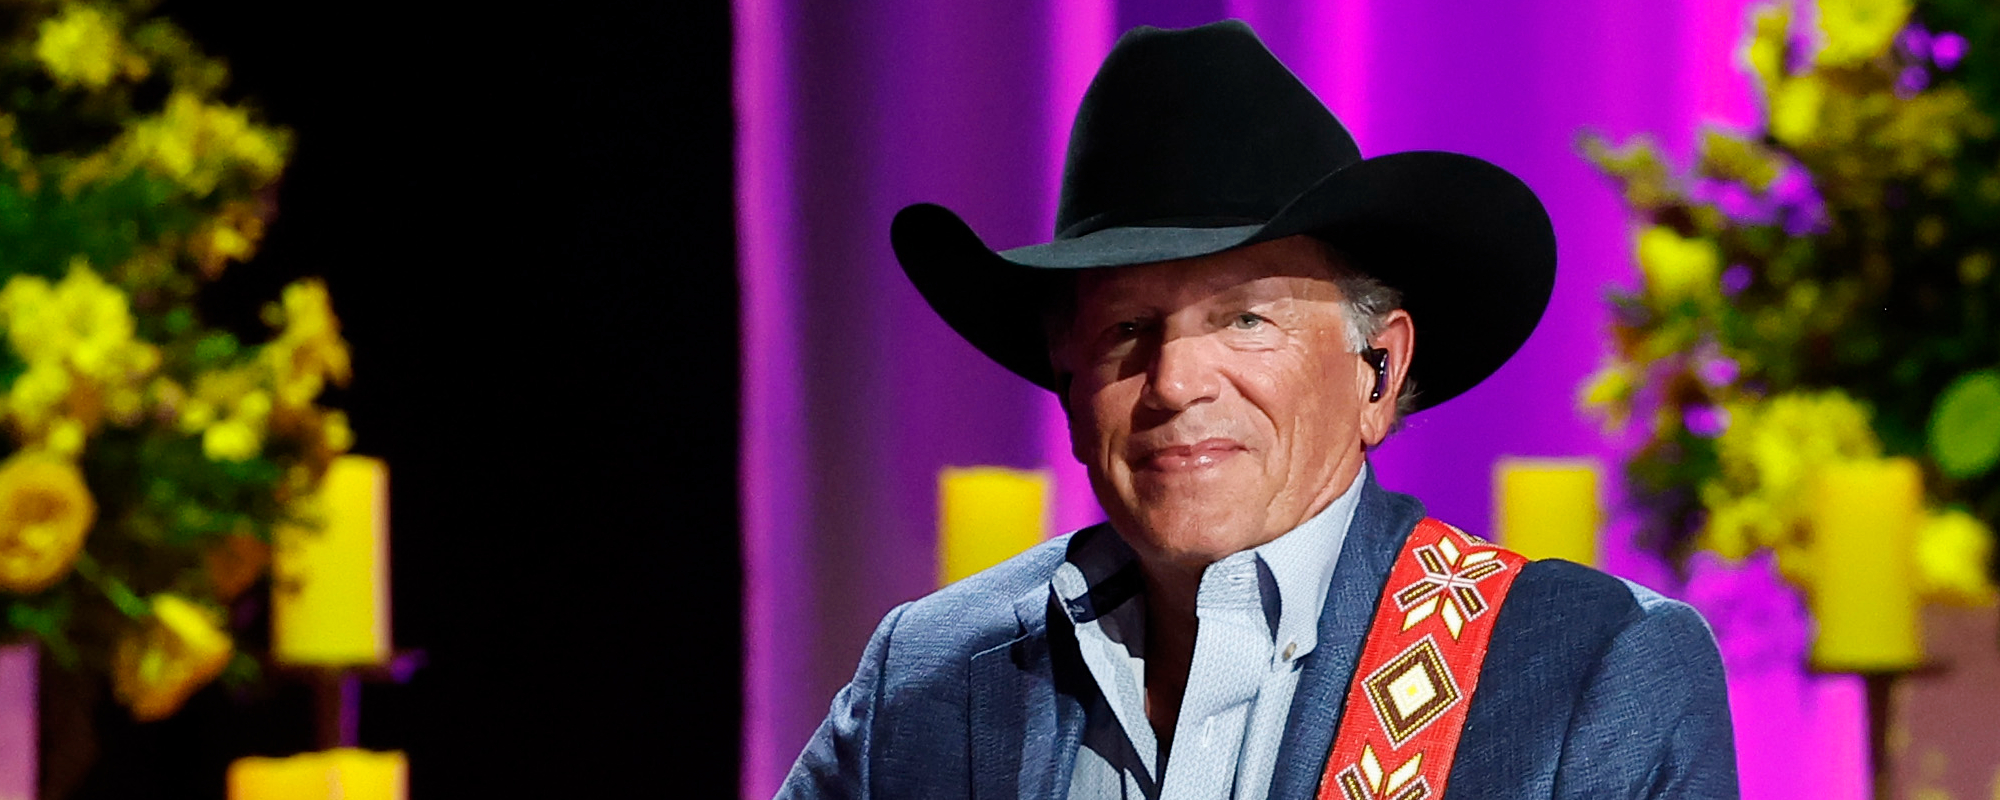 George Strait Mourns the Death of Good Friend and Road Manager—His 3rd Personal Loss in Months